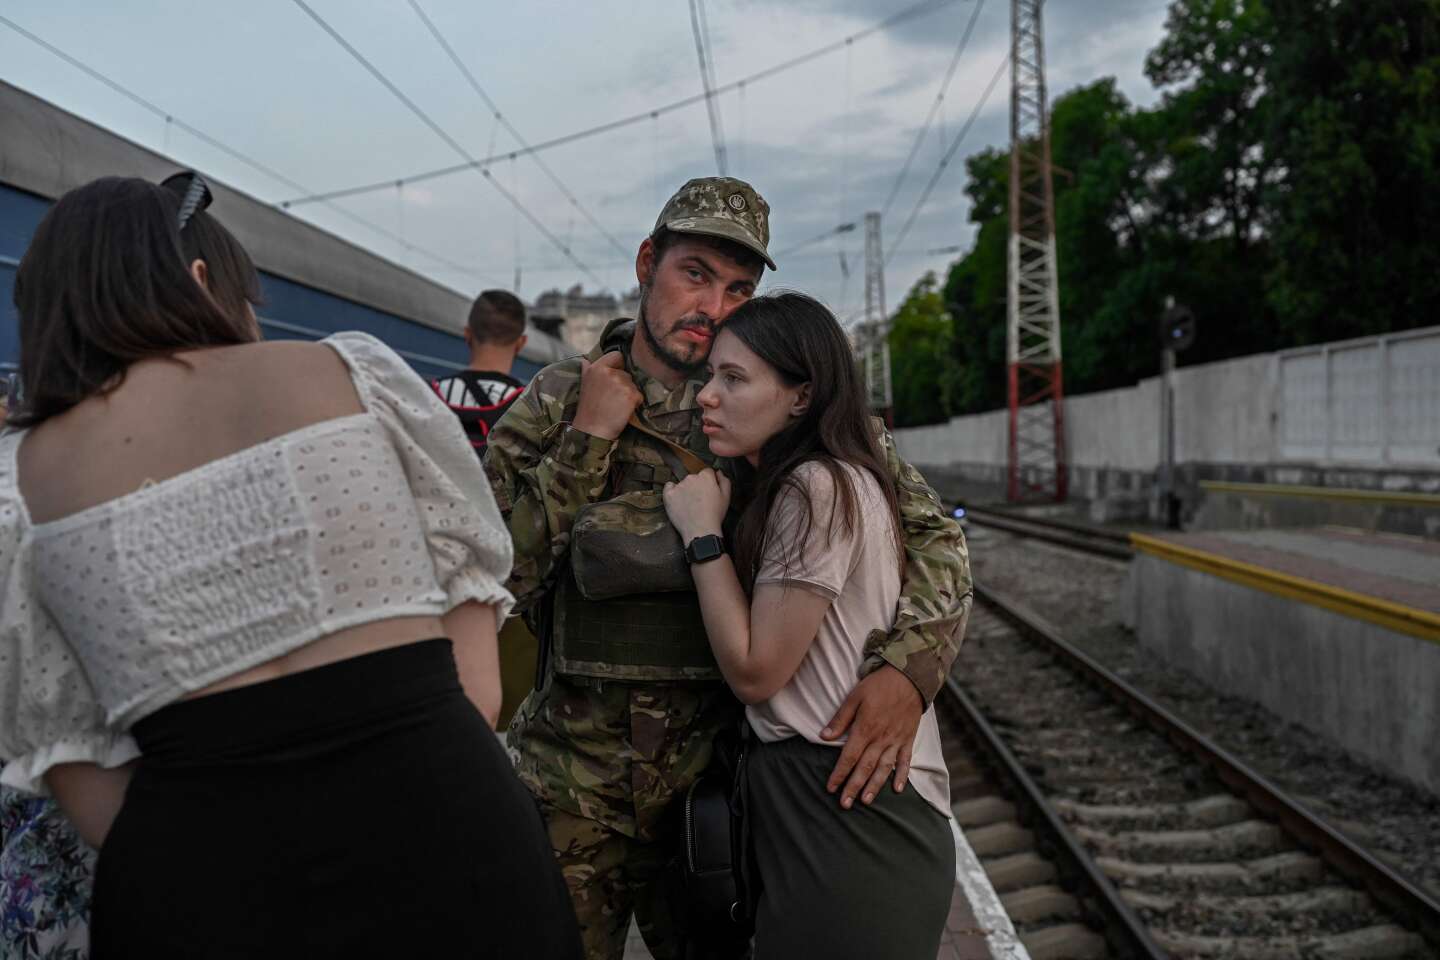 “One thing is certain, the Ukrainians now want to recapture Ukraine within its 1991 borders.”